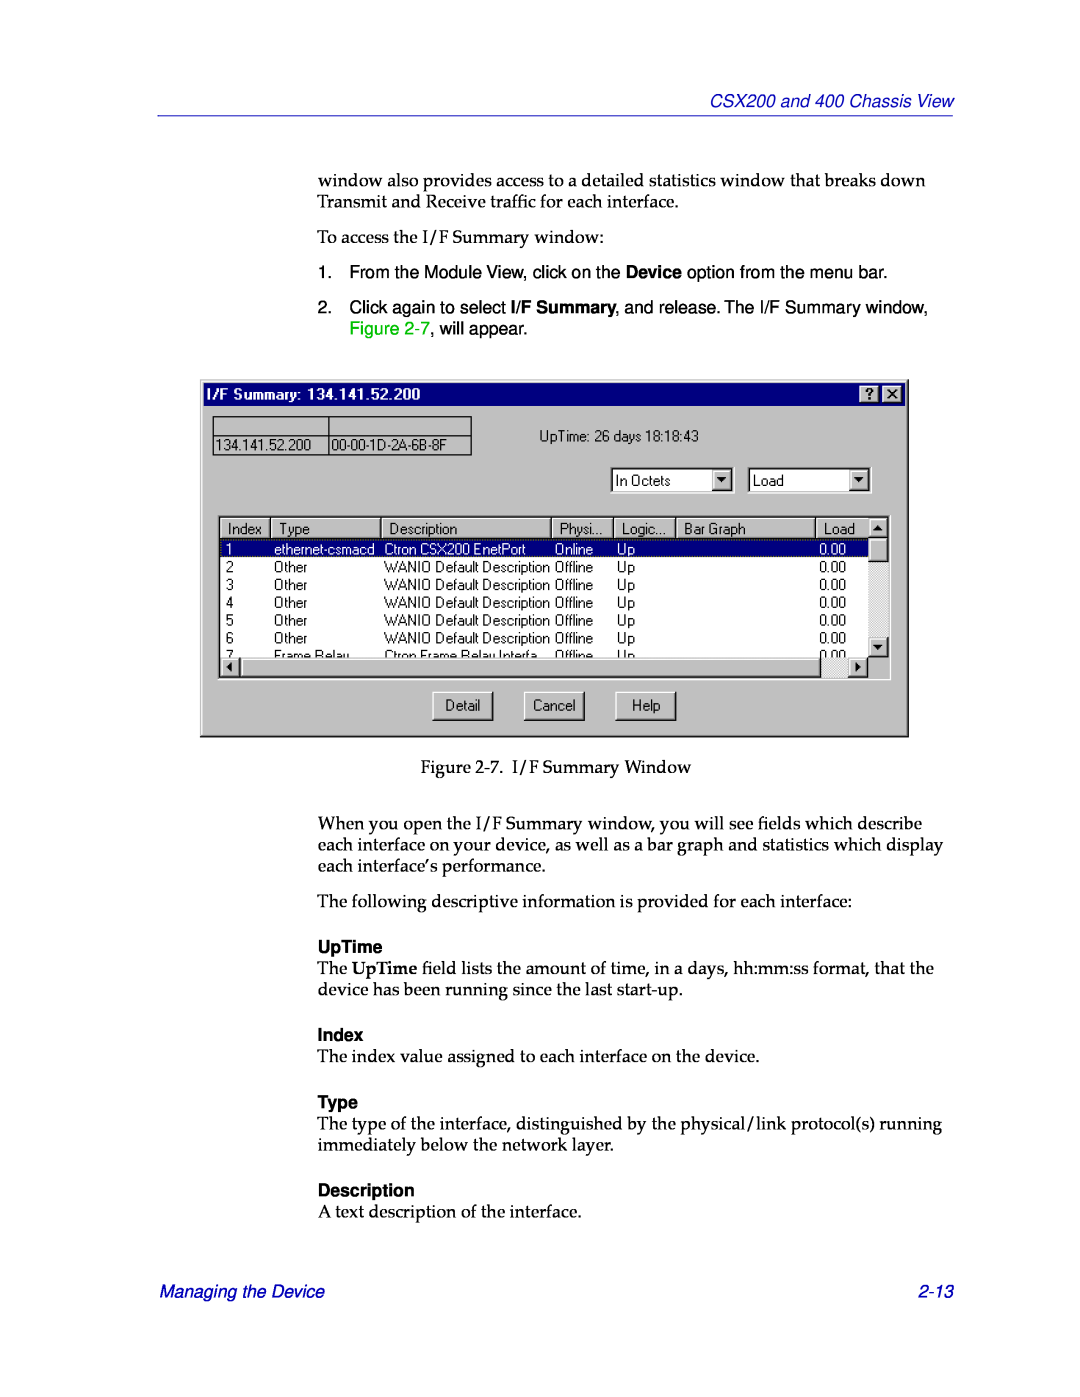 Cabletron Systems CSX400 manual Index, Type, Description, 2-13, CSX200 and 400 Chassis View, UpTime, Managing the Device 